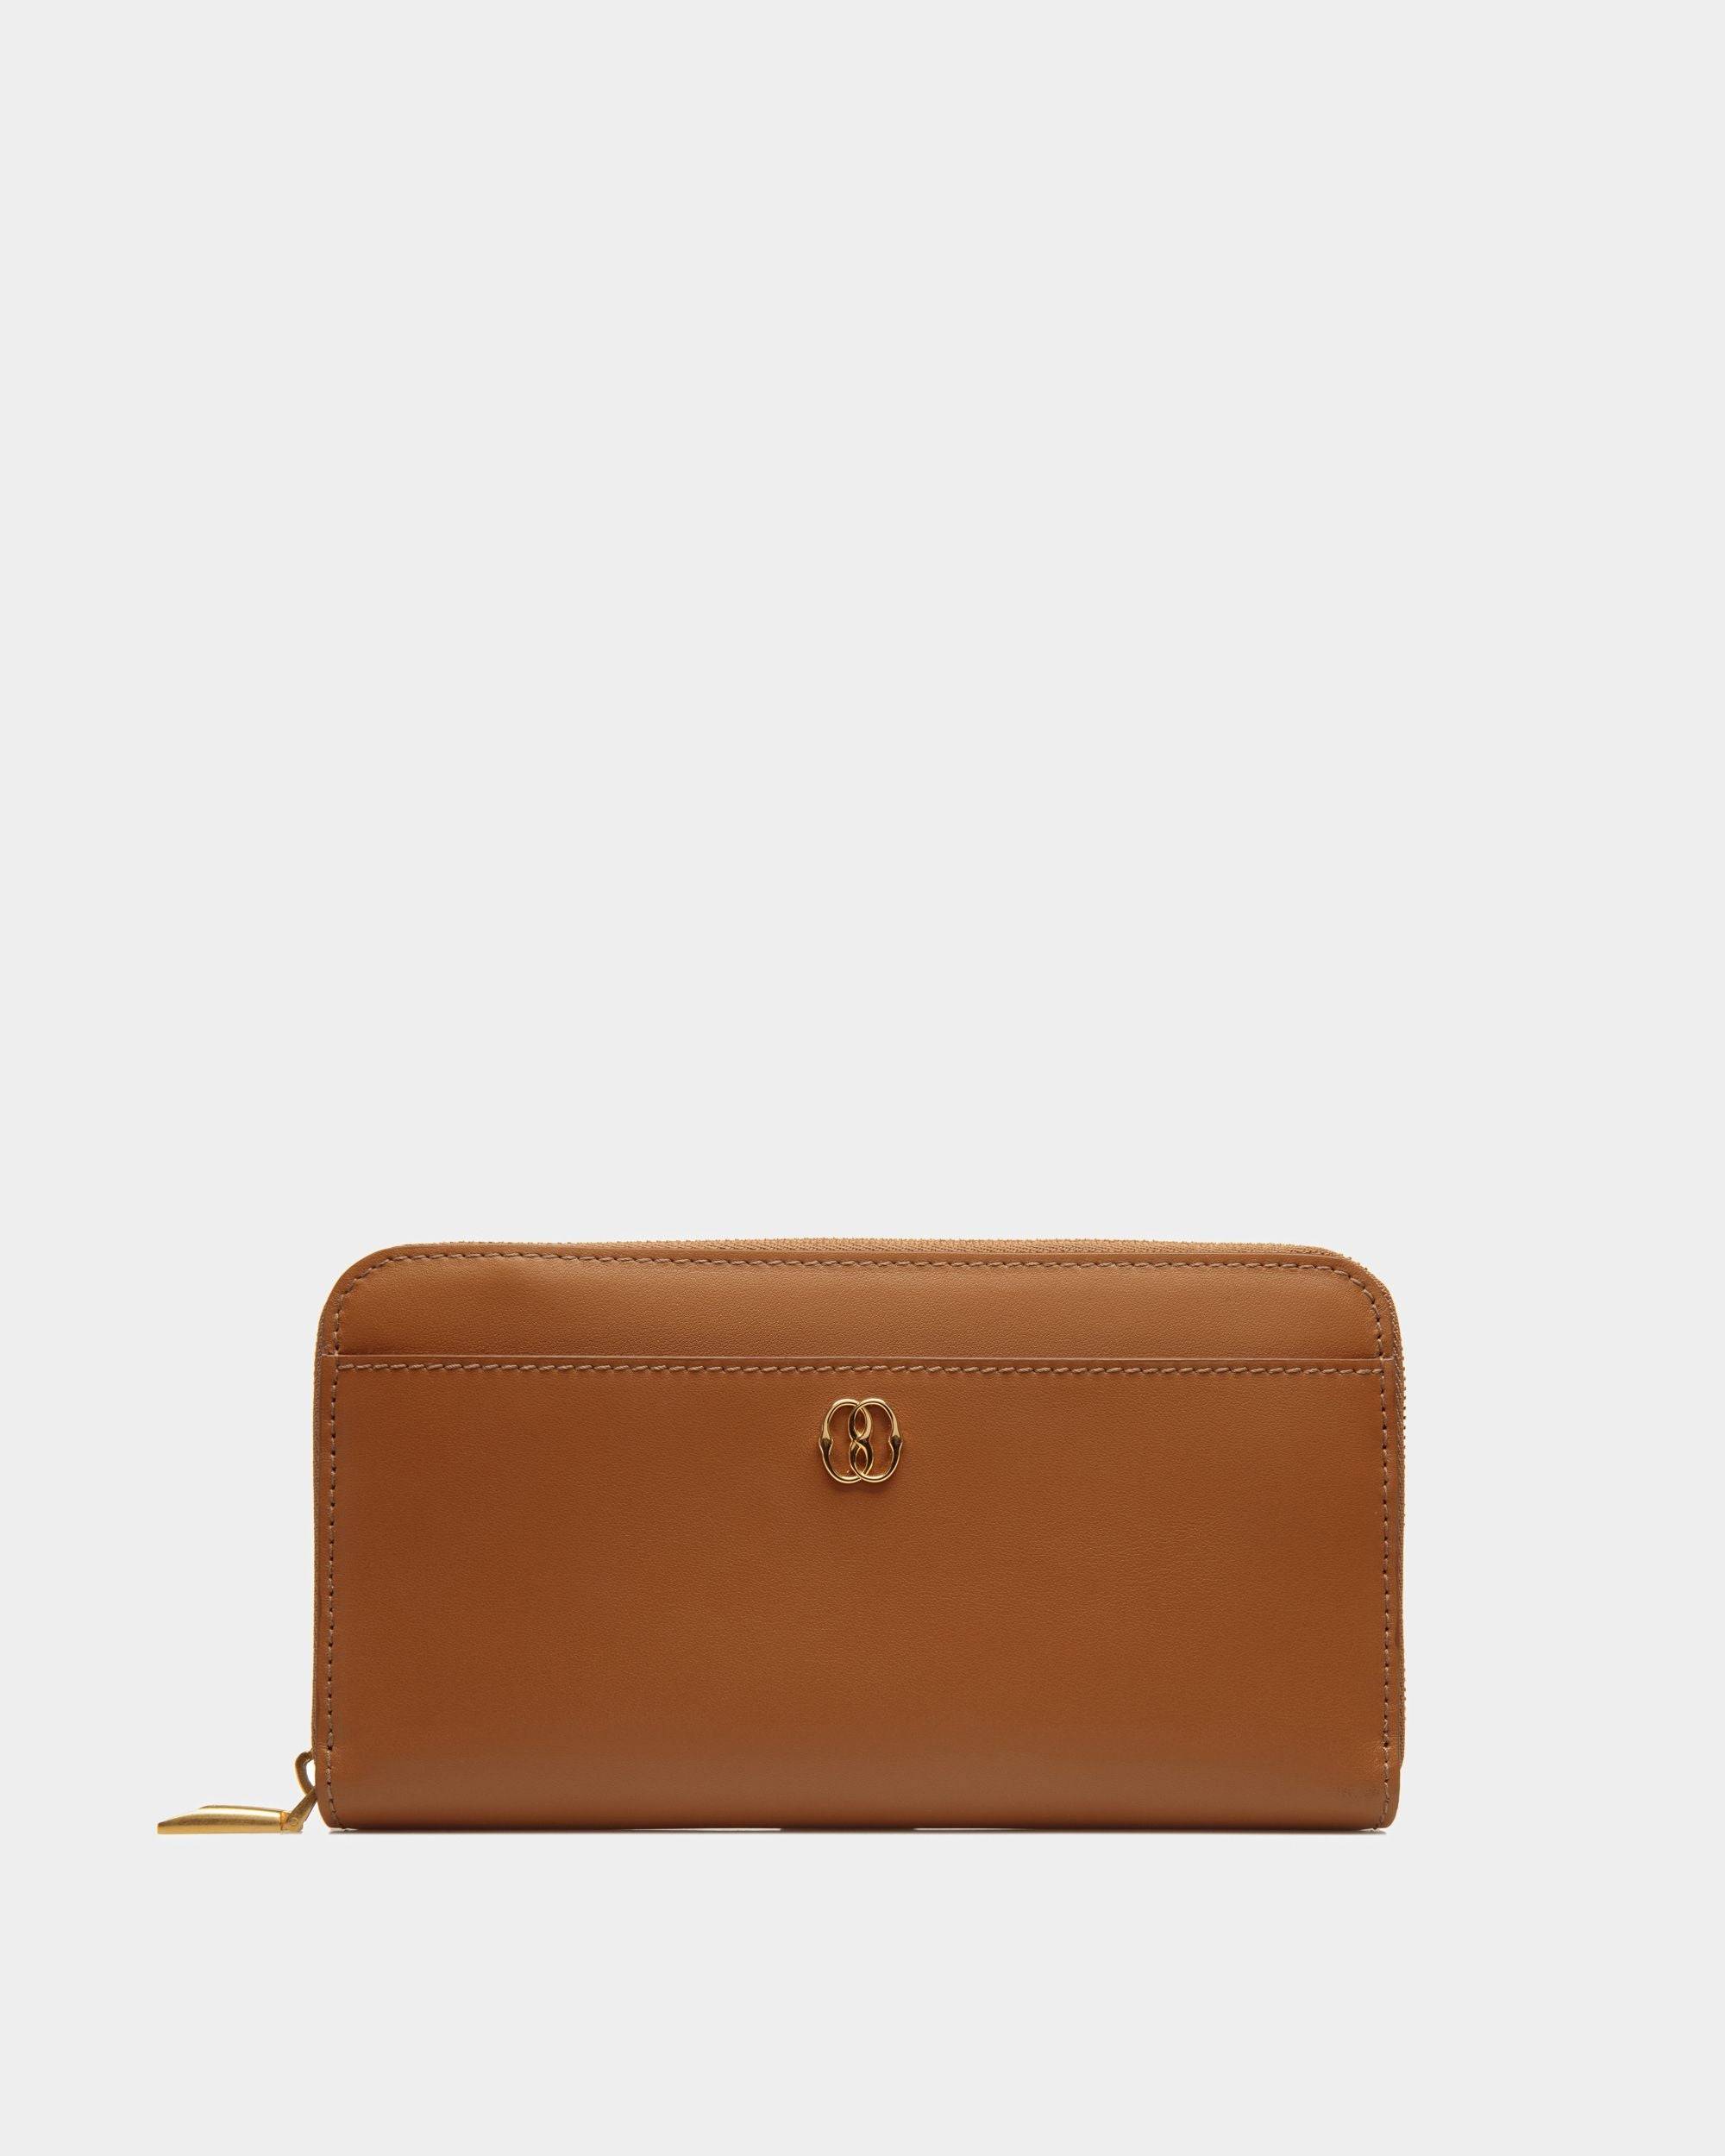 Women's Emblem Long Wallet In Brown Leather | Bally | Still Life Front